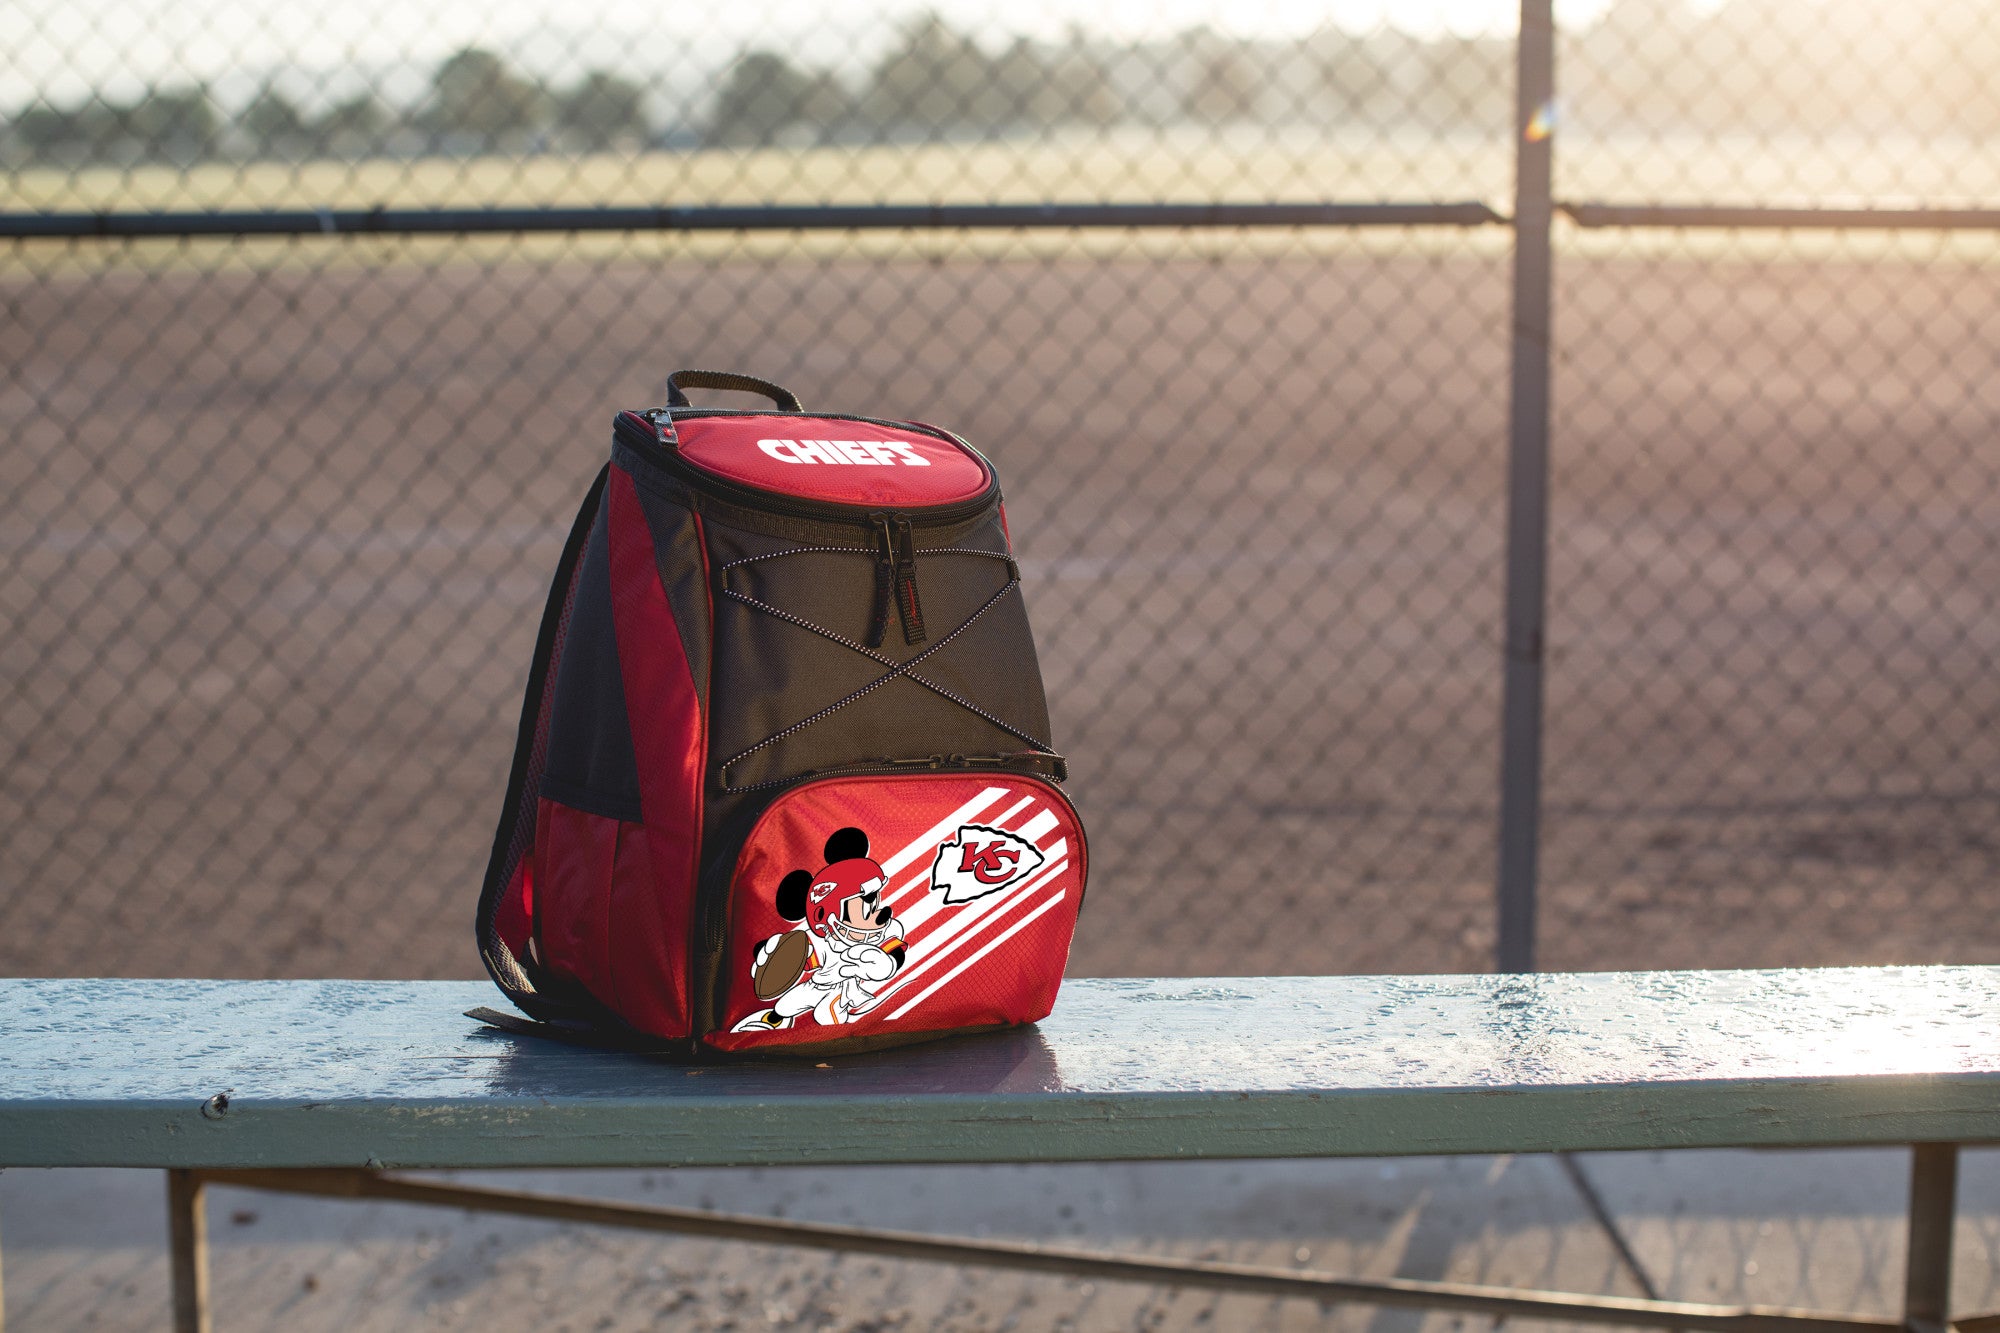 Kansas City Chiefs - Mickey Mouse - PTX Backpack Cooler